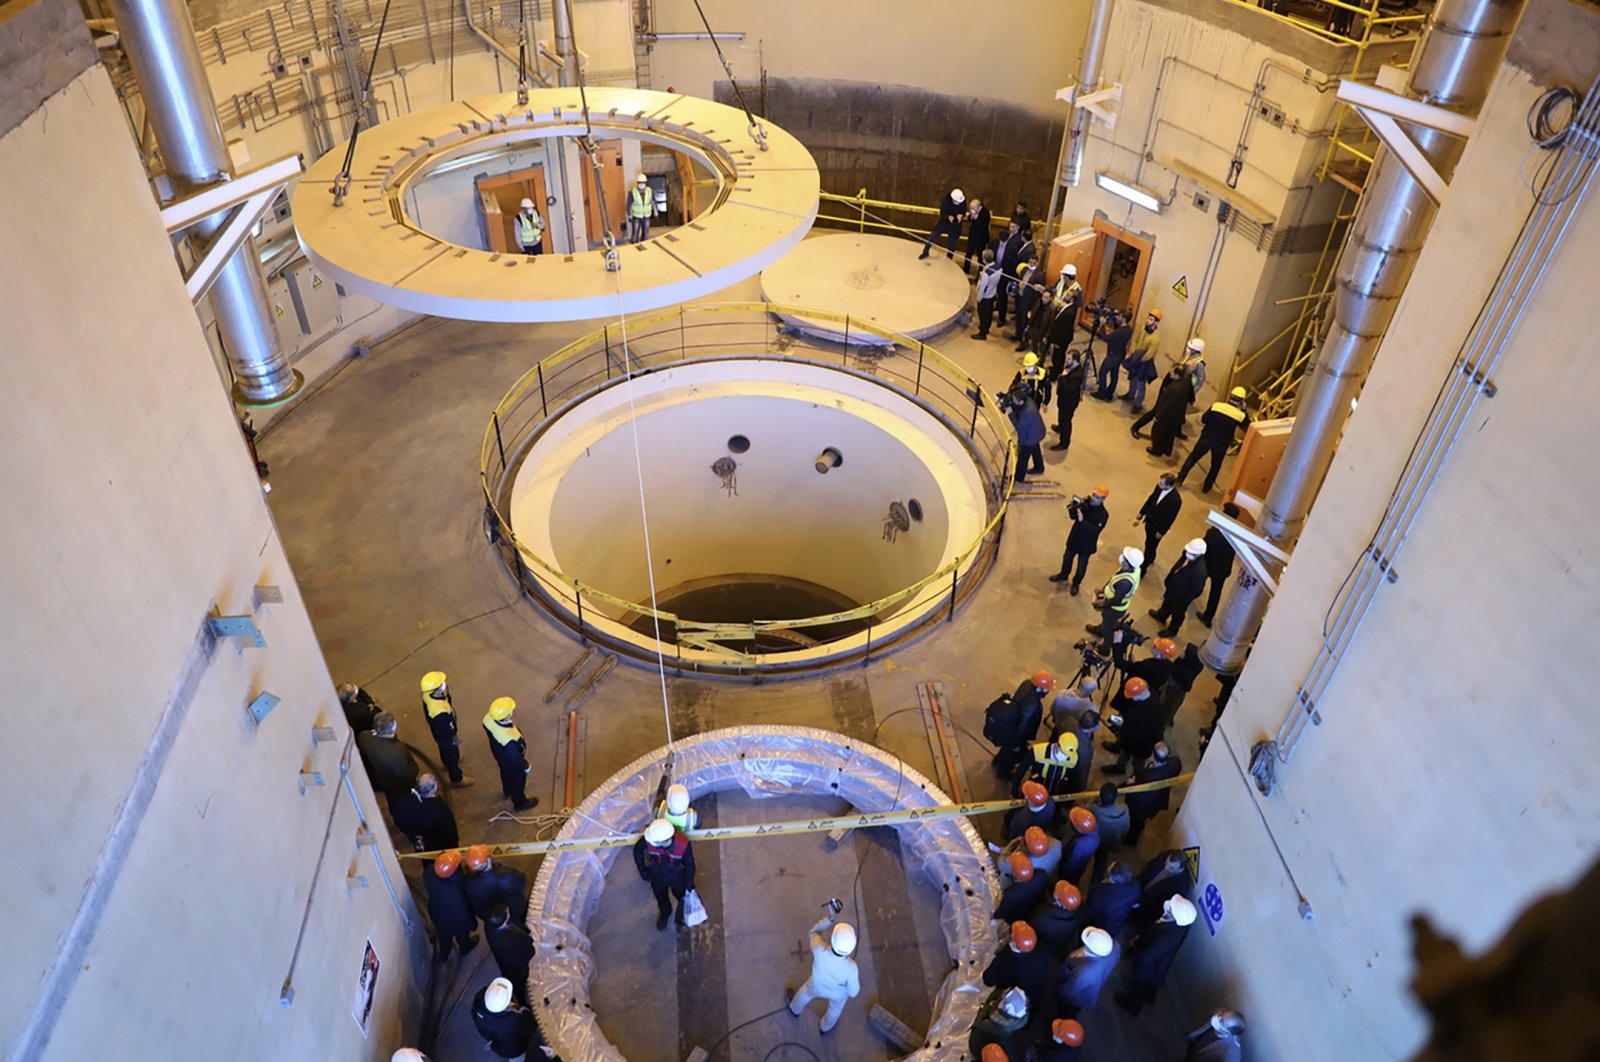 In this photo released by the Atomic Energy Organization of Iran, technicians work at the Arak heavy water reactor&#039;s secondary circuit, as officials and media visit the site, near Arak, 150 miles (250 kilometers) southwest of the capital Tehran, Iran, Dec. 23, 2019. (AP Photo)